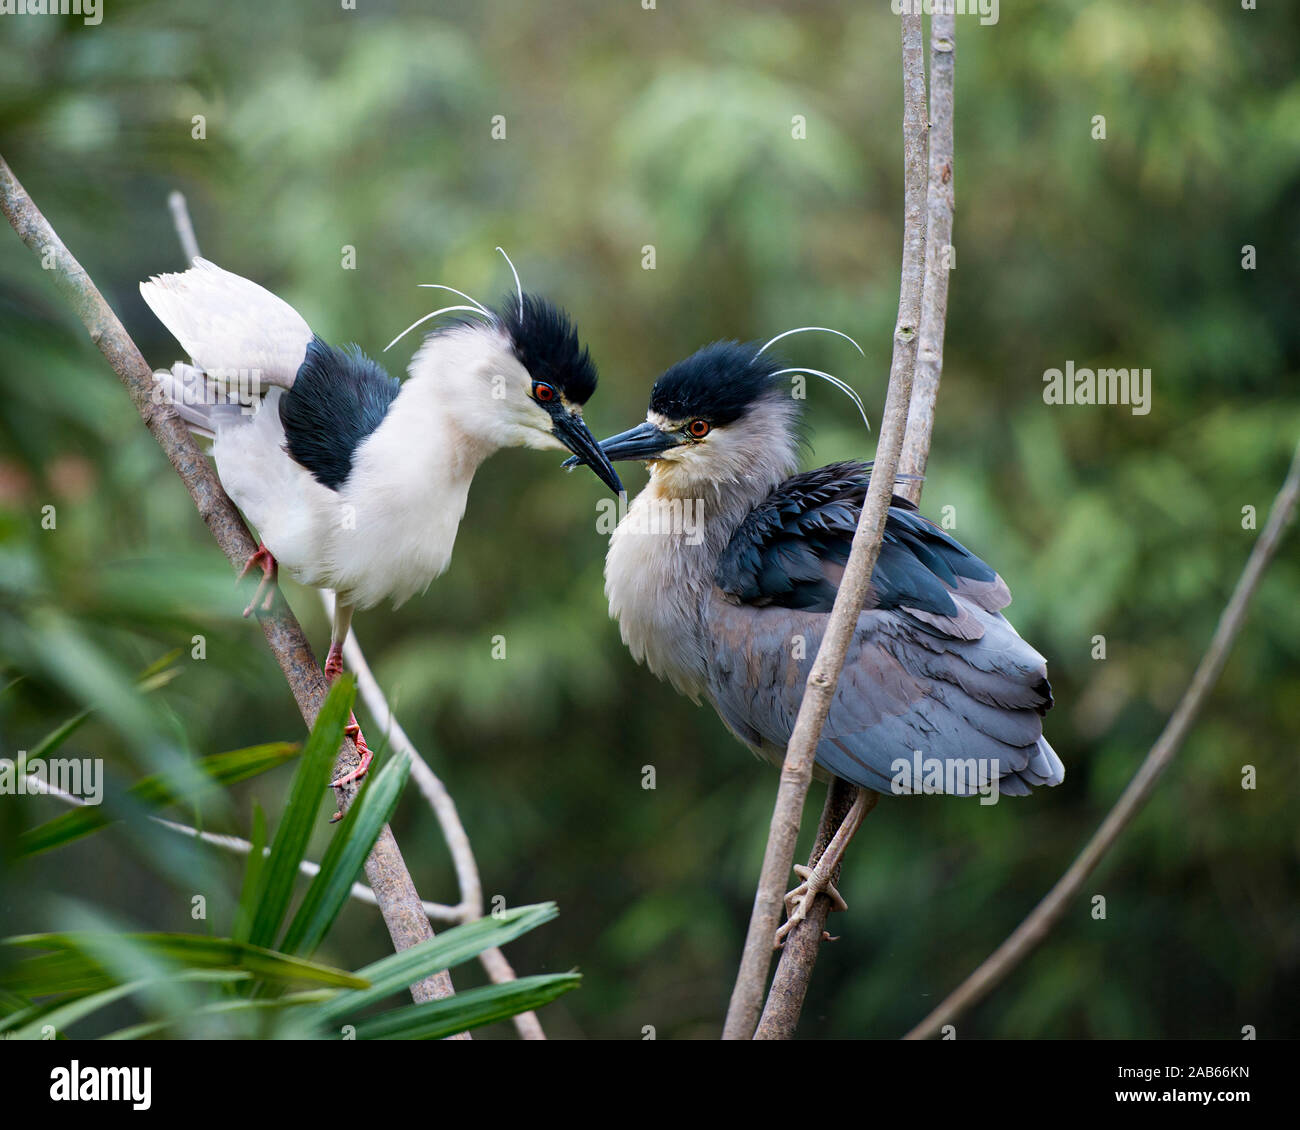 Black-Crowned Night-Heron birds perched interacting with each other in their environement and surrounding with a bokeh background. Stock Photo